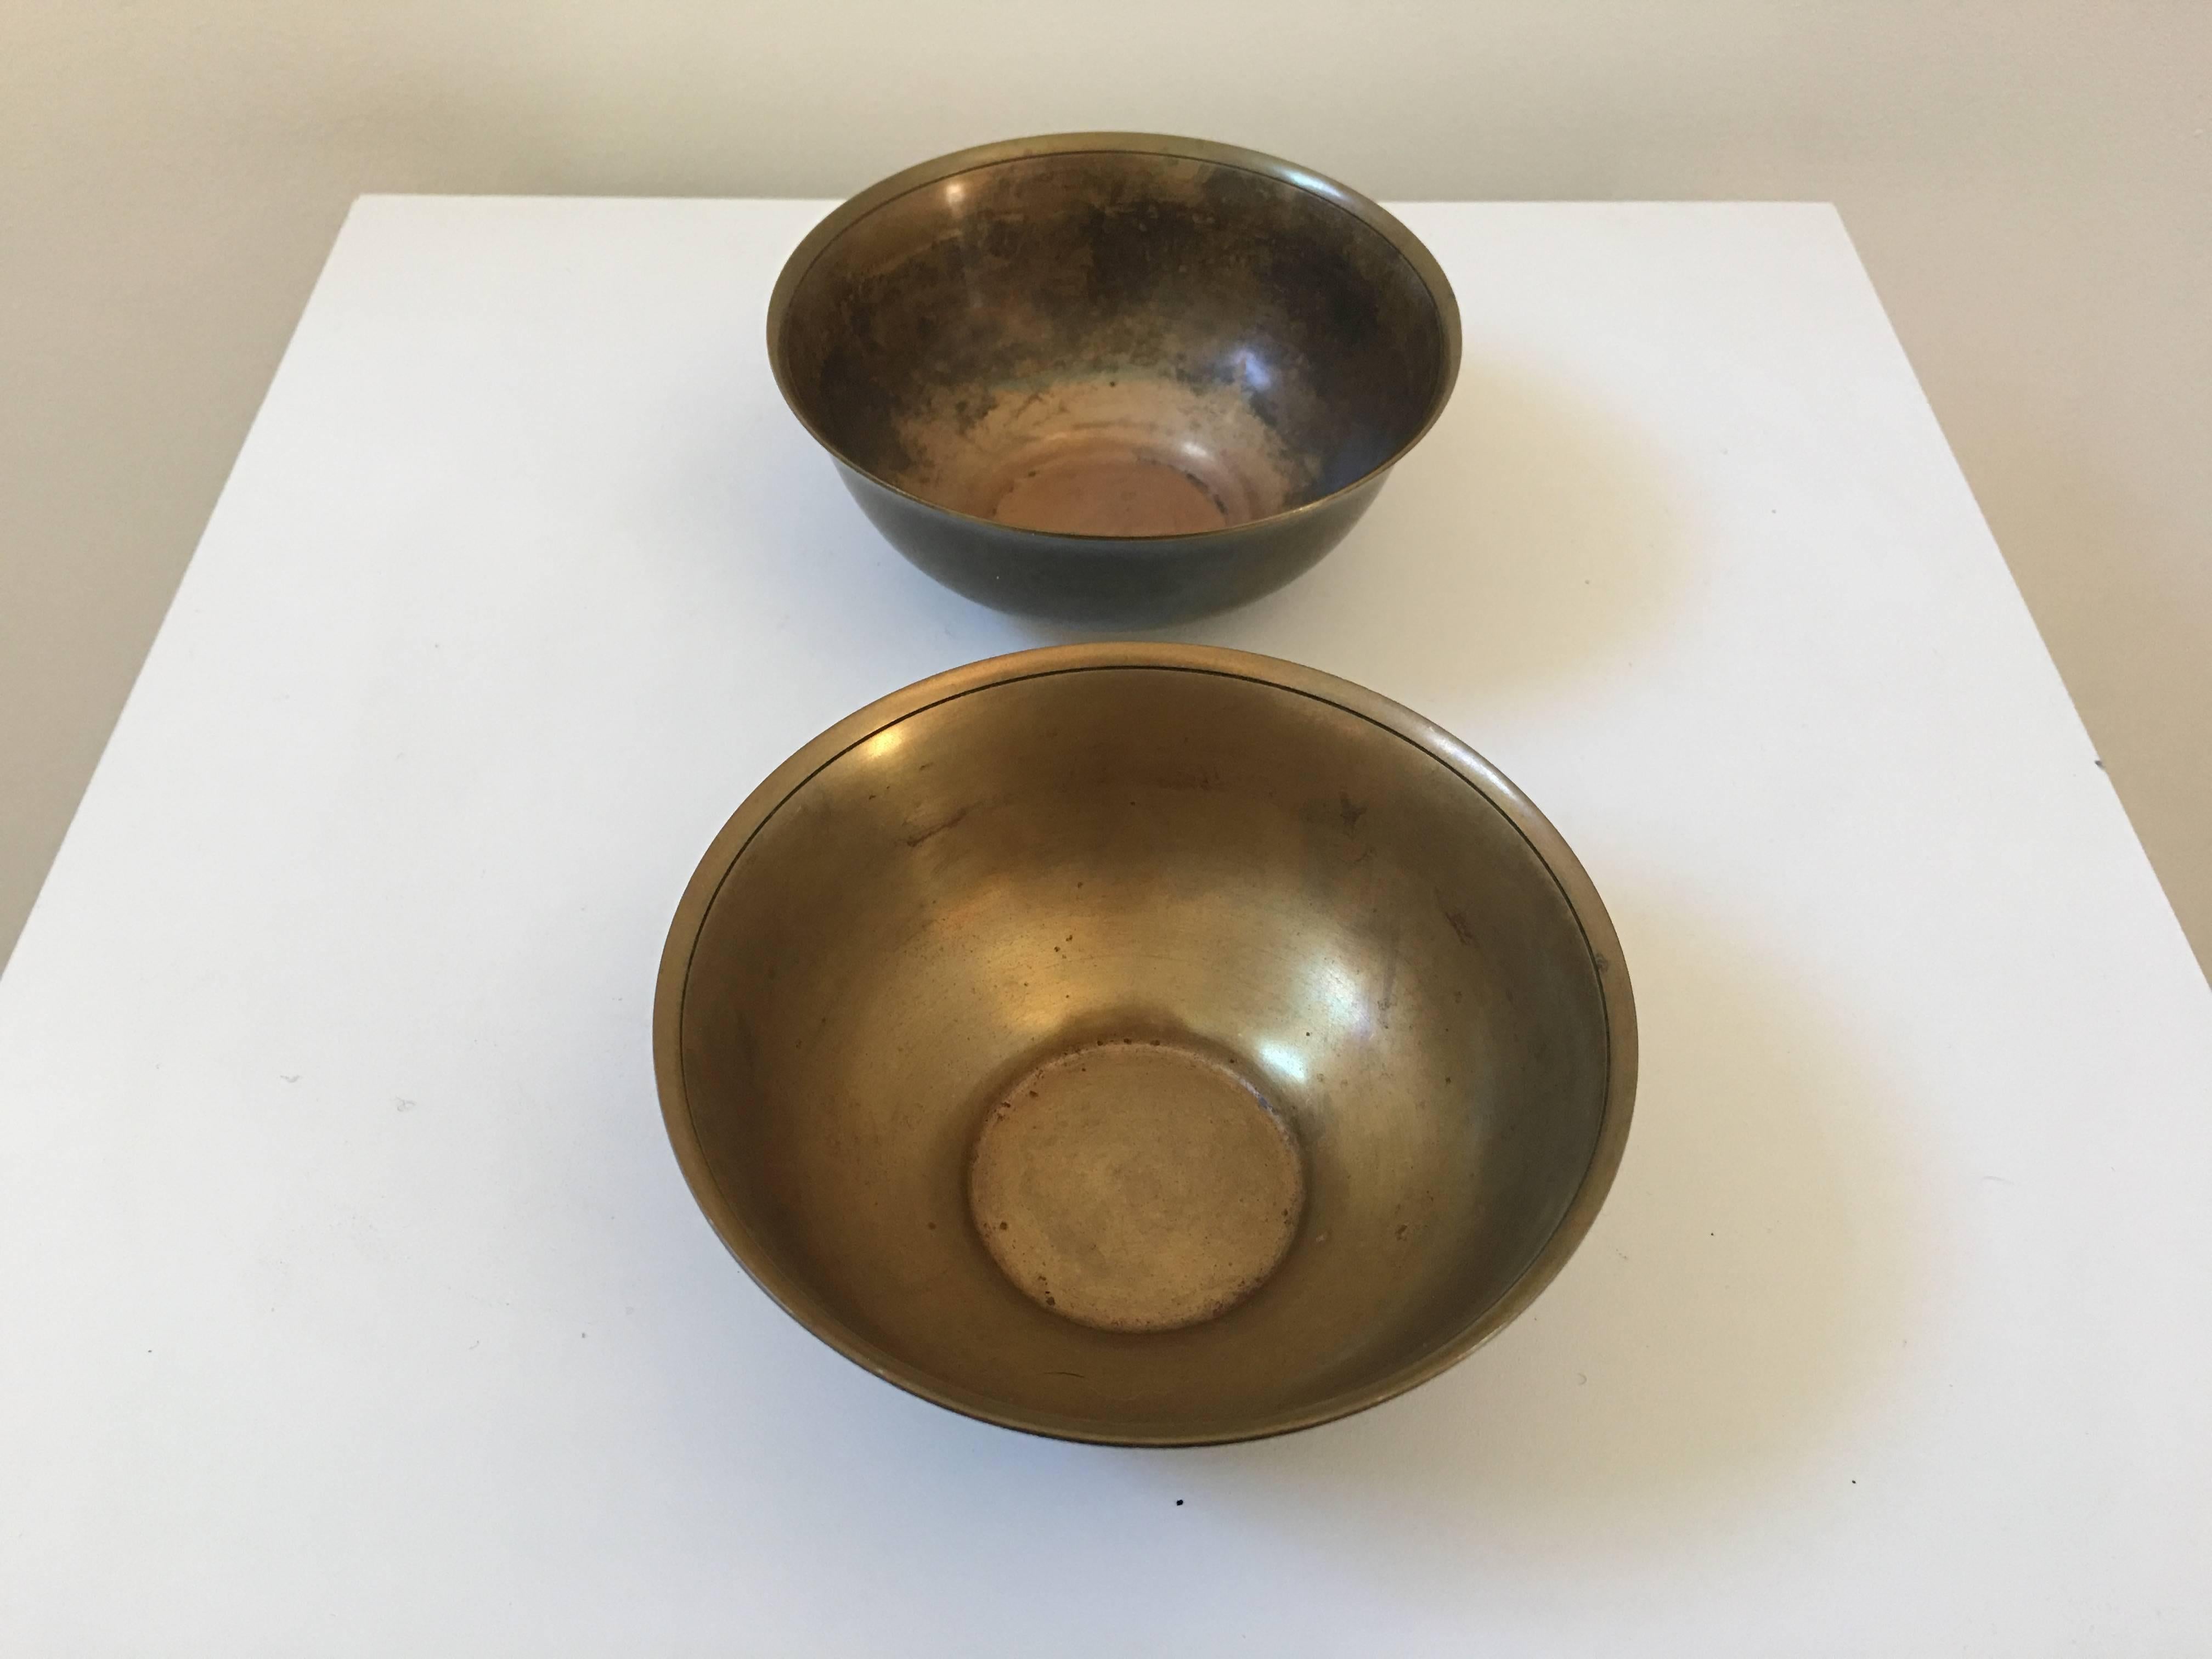 A fabulous pair of bronze bowls with the most perfect shape to cradle in one's hands. The patina is wonderful too. Signed at the bottom.